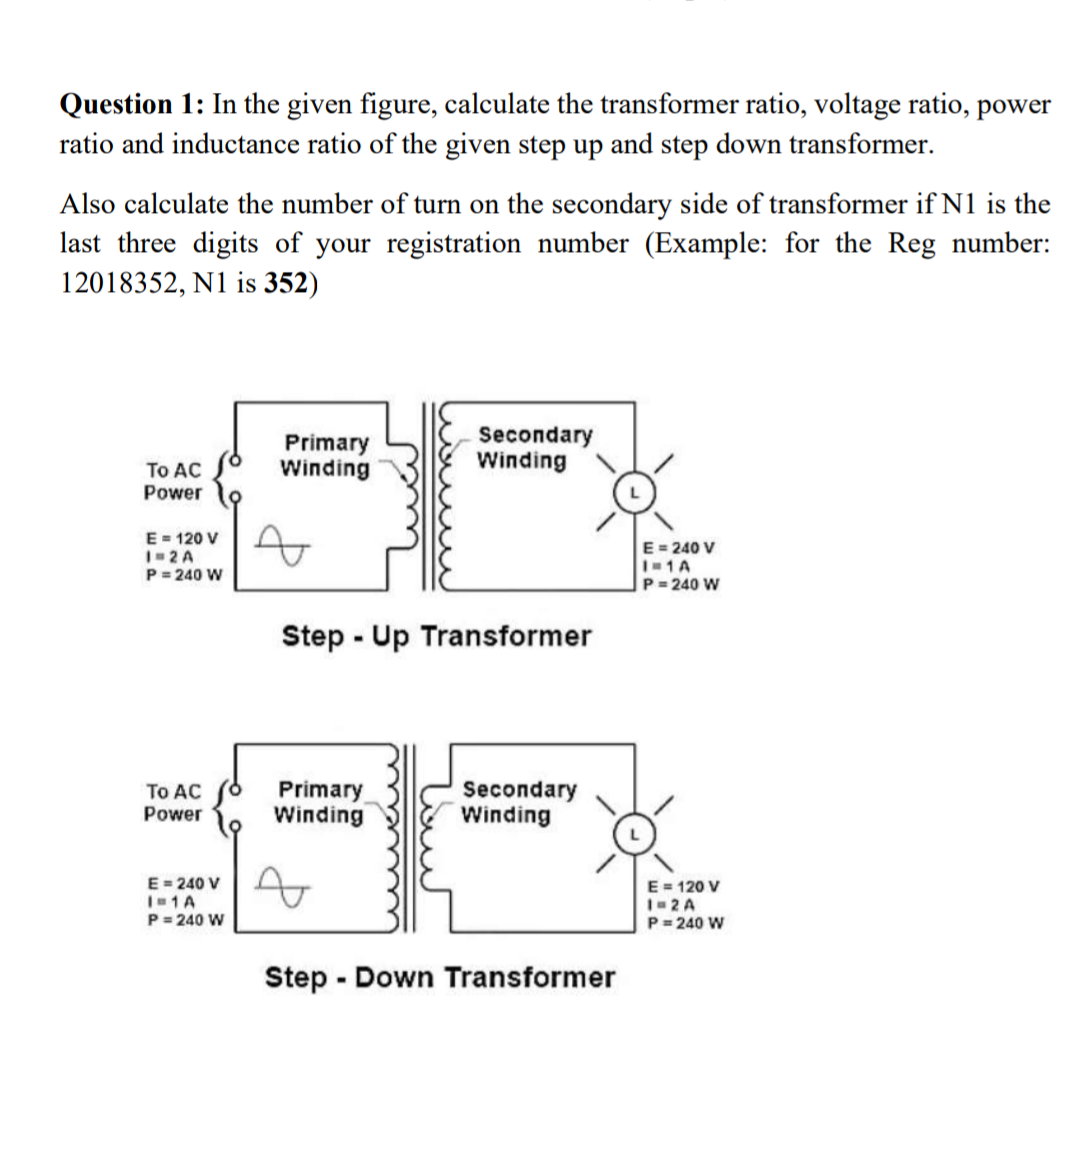 Question 1: In the given figure, calculate the transformer ratio, voltage ratio, power
ratio and inductance ratio of the given step up and step down transformer.
Also calculate the number of turn on the secondary side of transformer if N1 is the
last three digits of your registration number (Example: for the Reg number:
12018352, N1 is 352)
Primary
Winding
Secondary
Winding
To AC
Power
E= 120 V
I-2 A
P= 240 W
E = 240 V
I-1A
P= 240 W
Step - Up Transformer
To AC
Primary
Winding
Secondary
Winding
Power
E= 240 V
I1A
P= 240 W
E = 120 V
I- 2 A
P = 240 W
Step - Down Transformer
